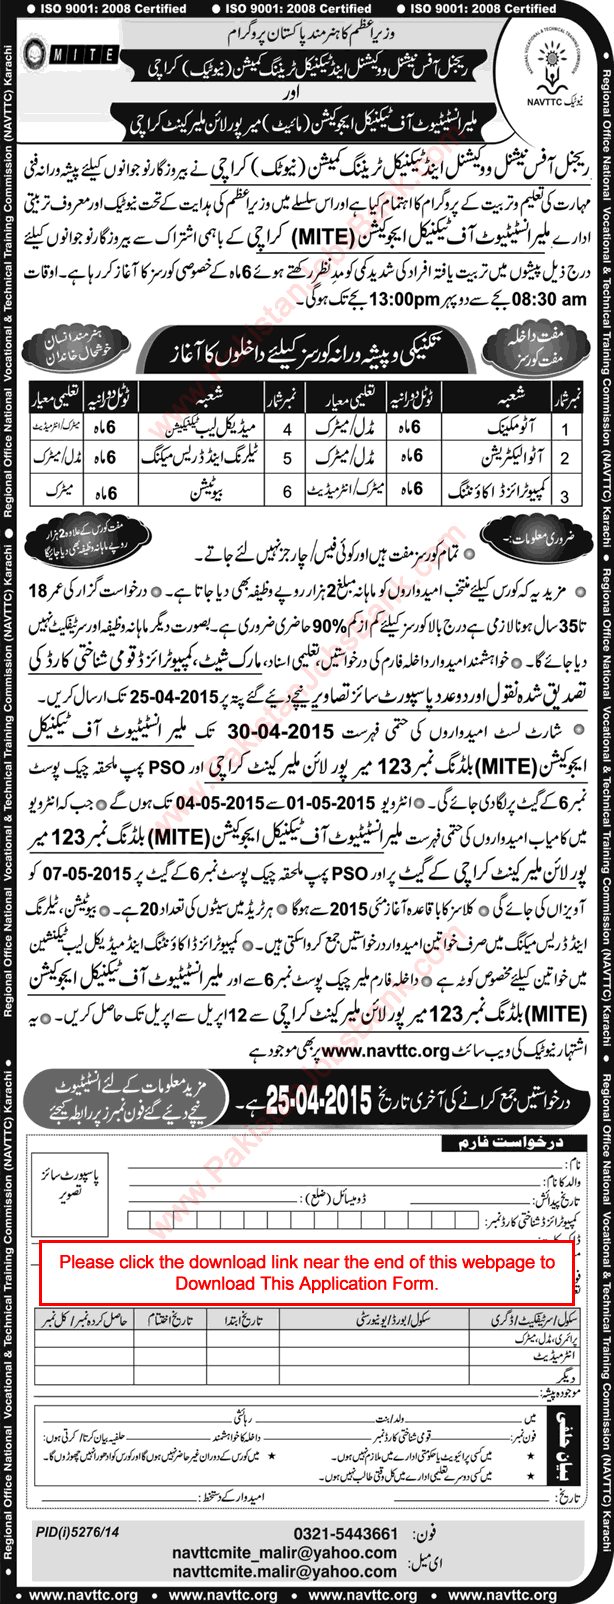 NAVTTC Free Courses in Karachi 2015 April Application Form Malir Institute of Technical Education